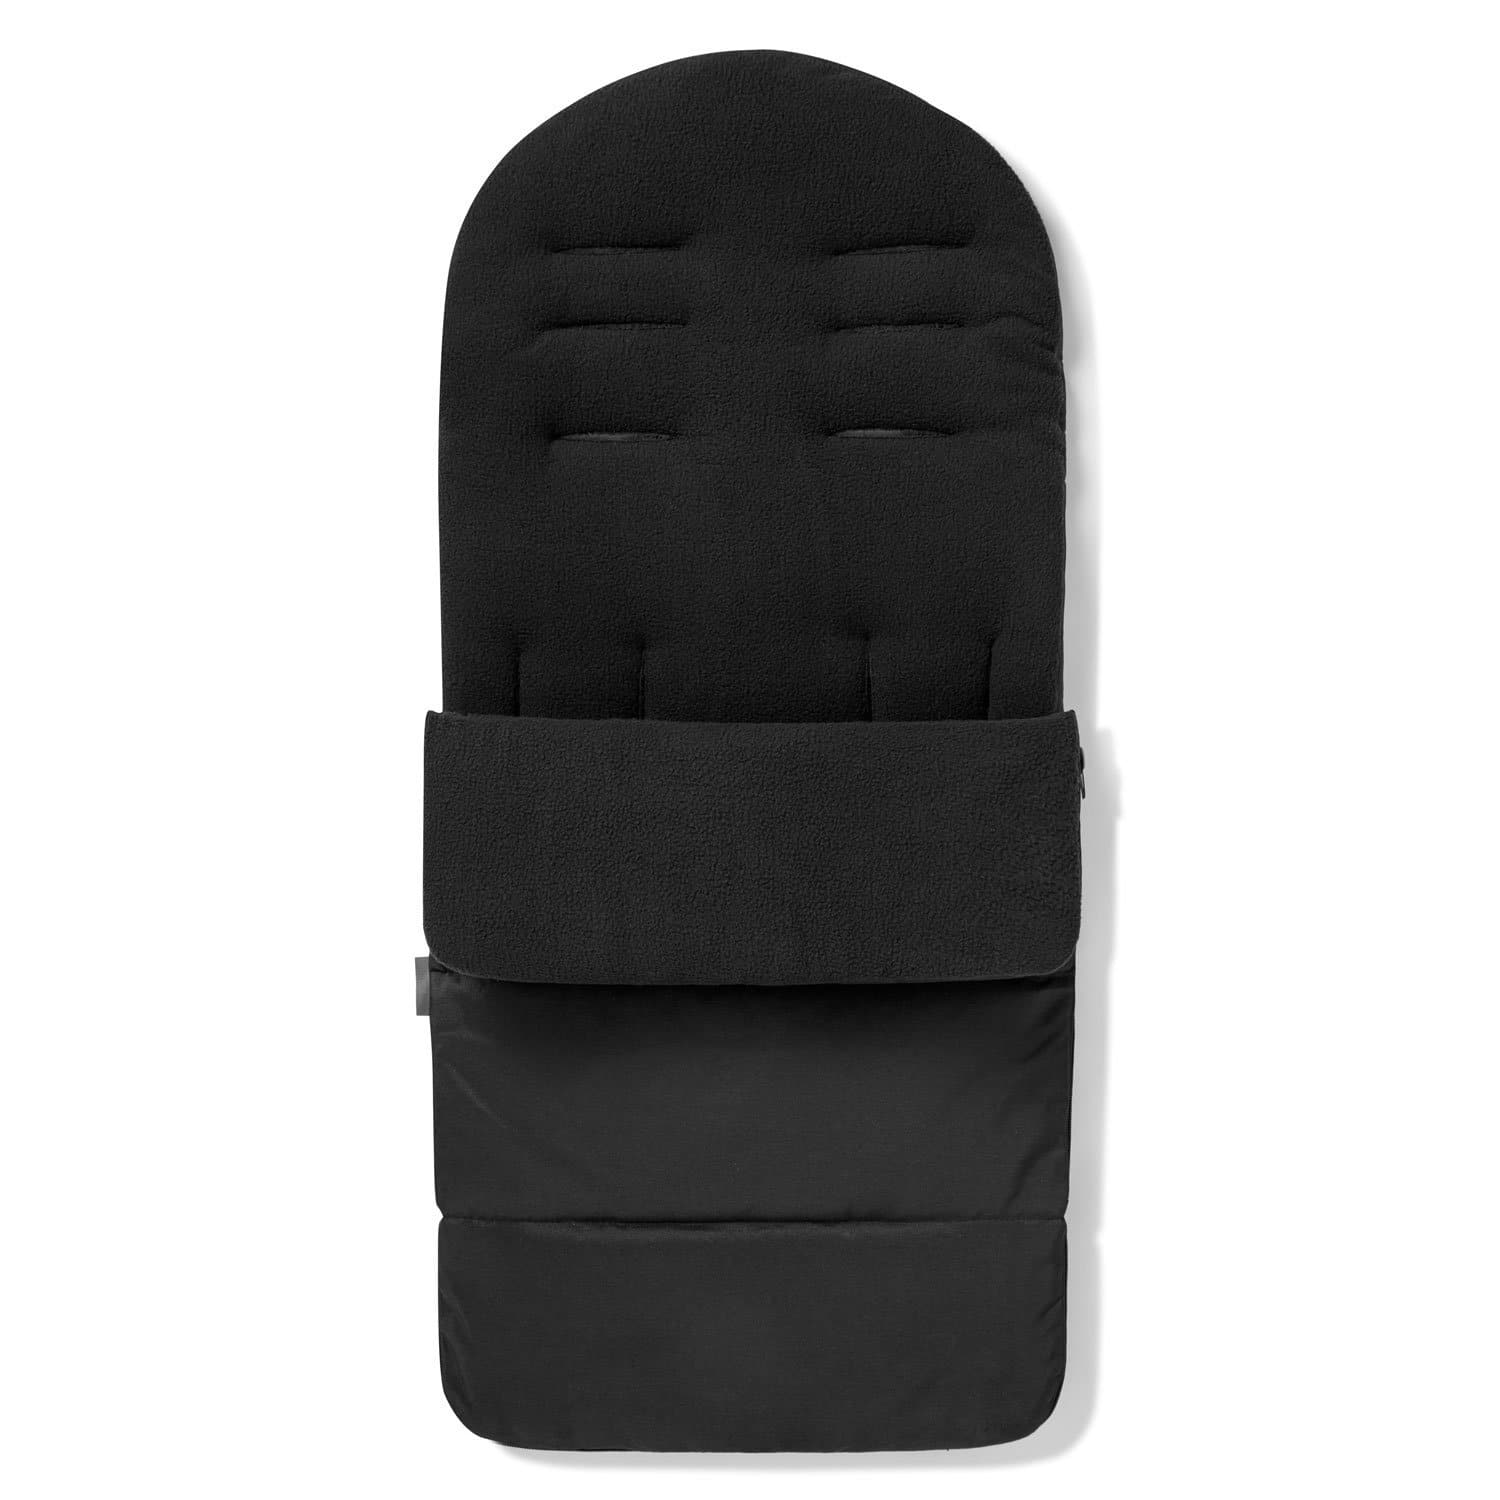 Premium Footmuff / Cosy Toes Compatible with Mee-Go - Black Jack / Fits All Models | For Your Little One